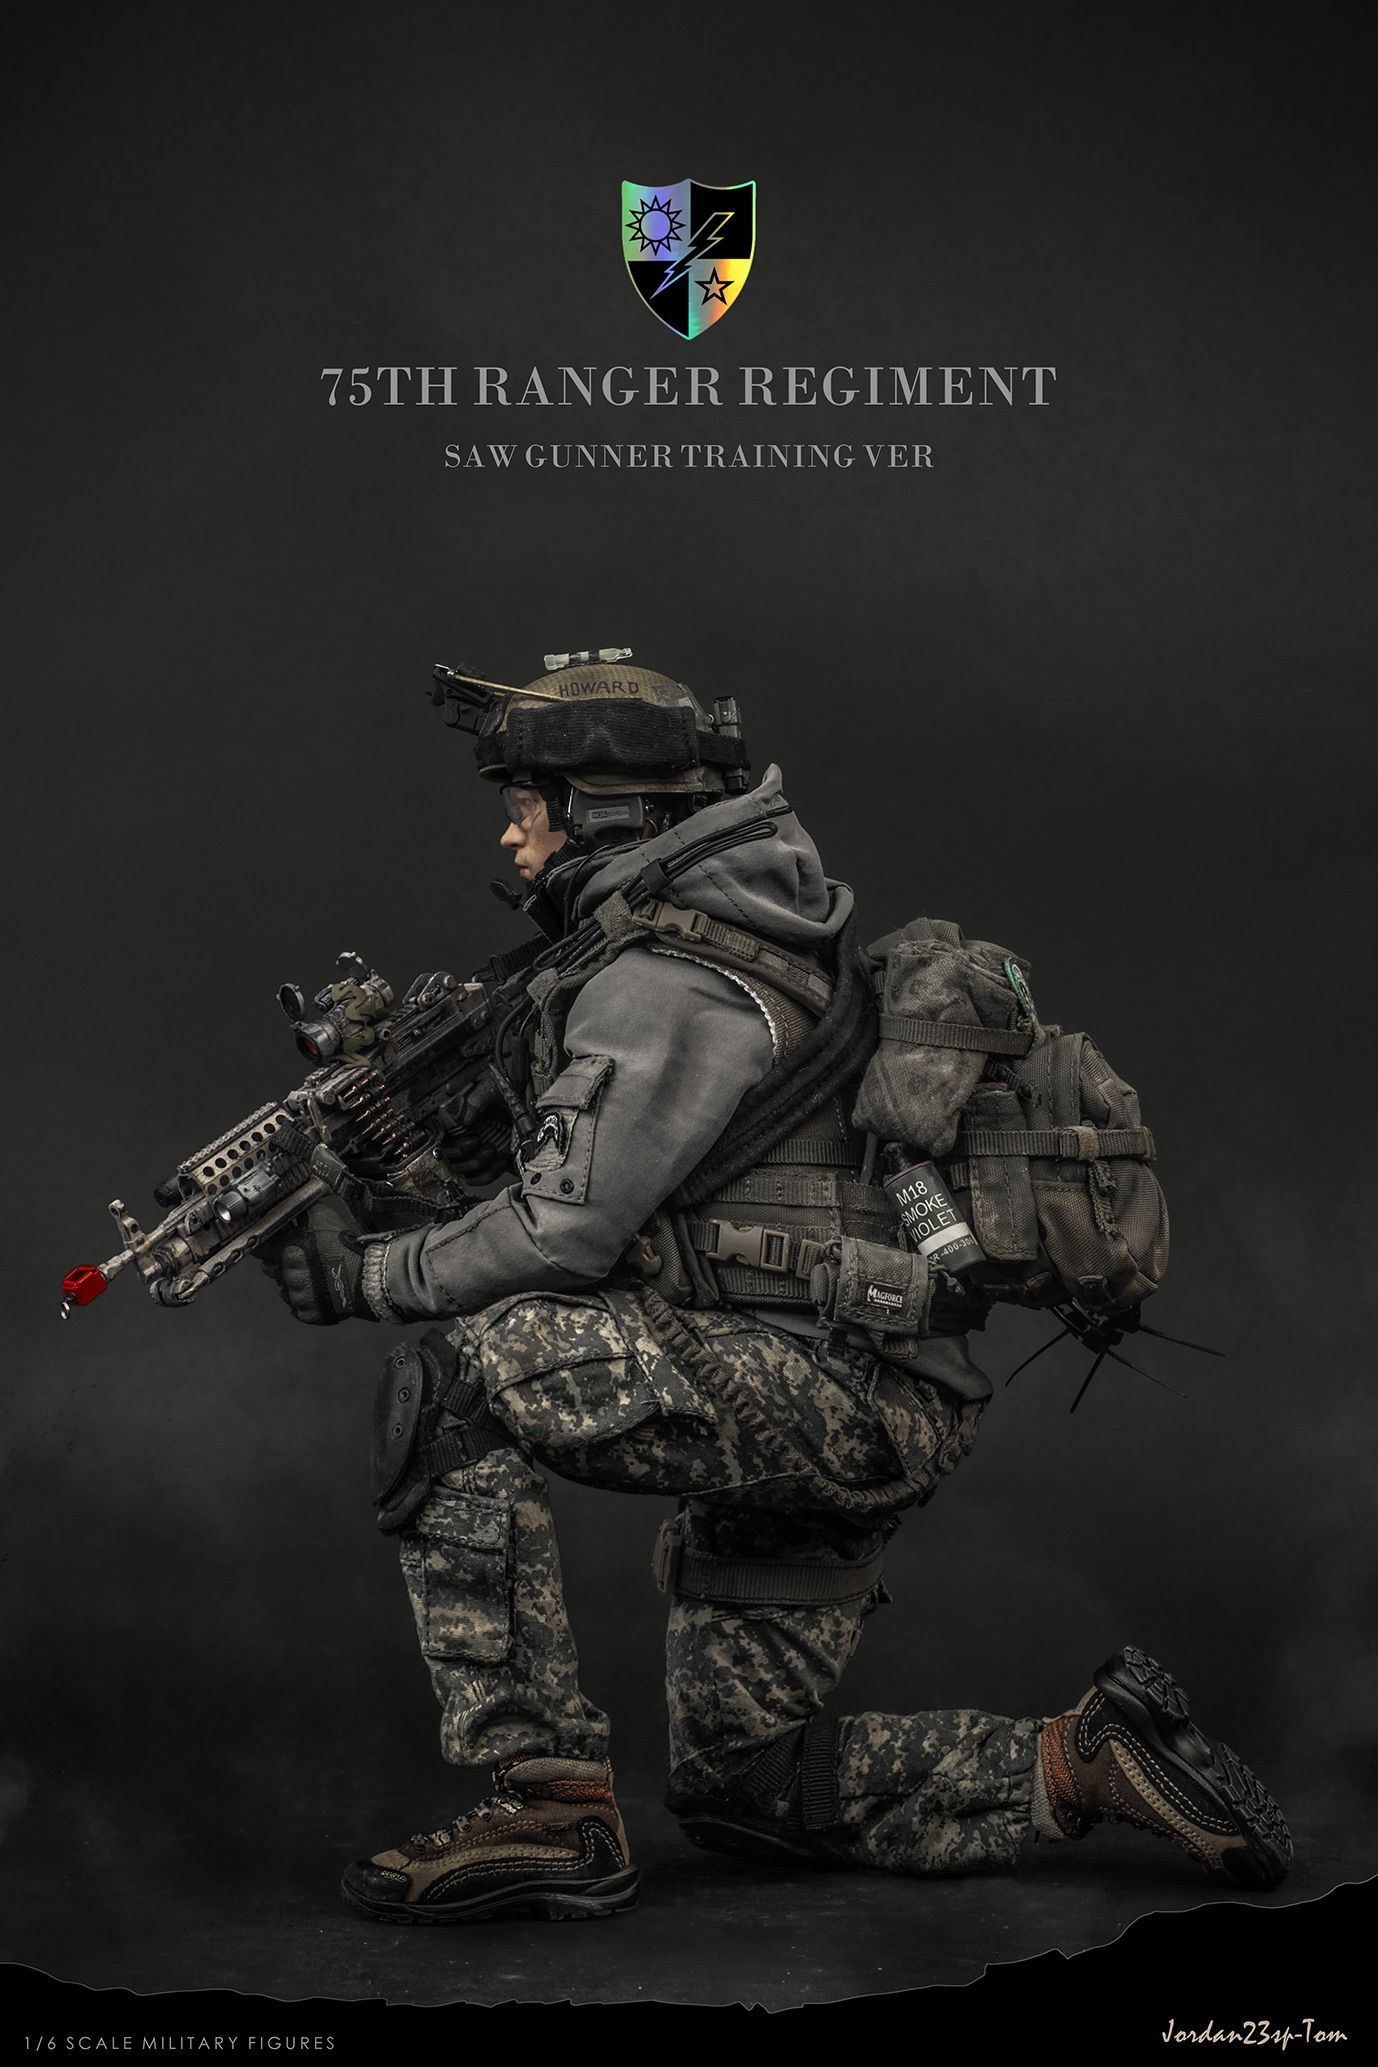 Airsoft Wallpaper. Us army rangers, Military special forces, 75th ranger regiment